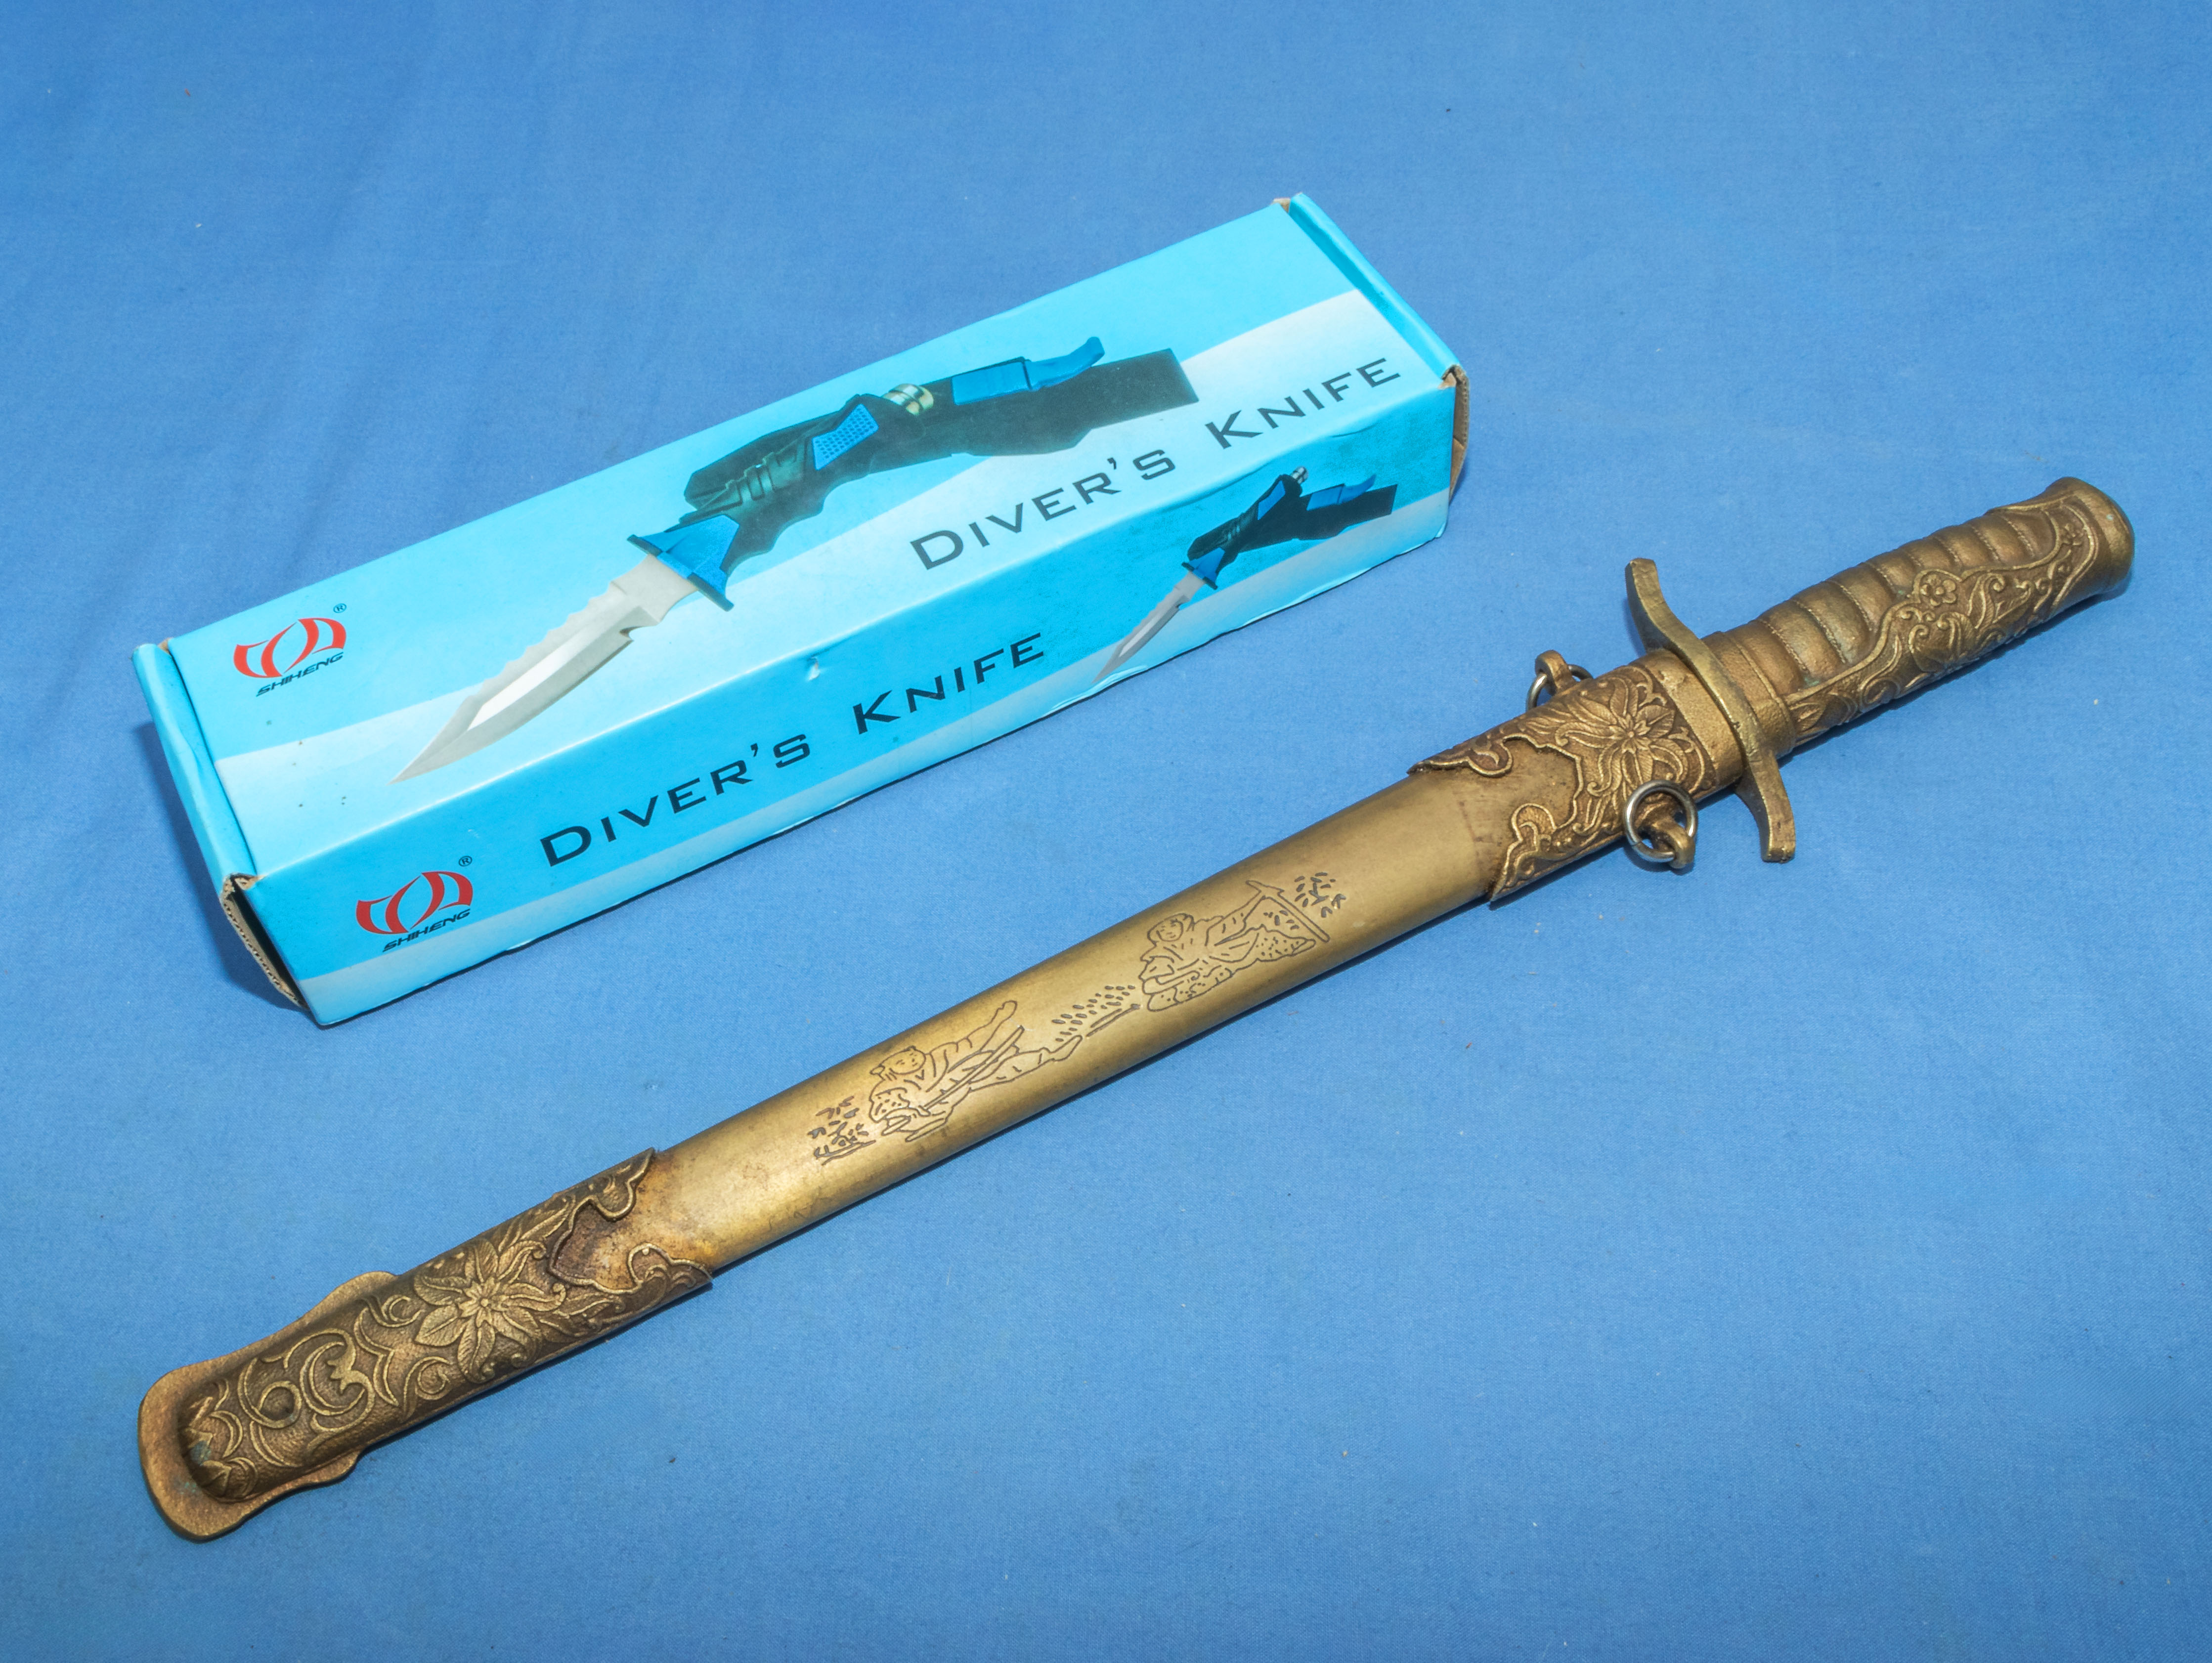 A replica small sword and a divers knife